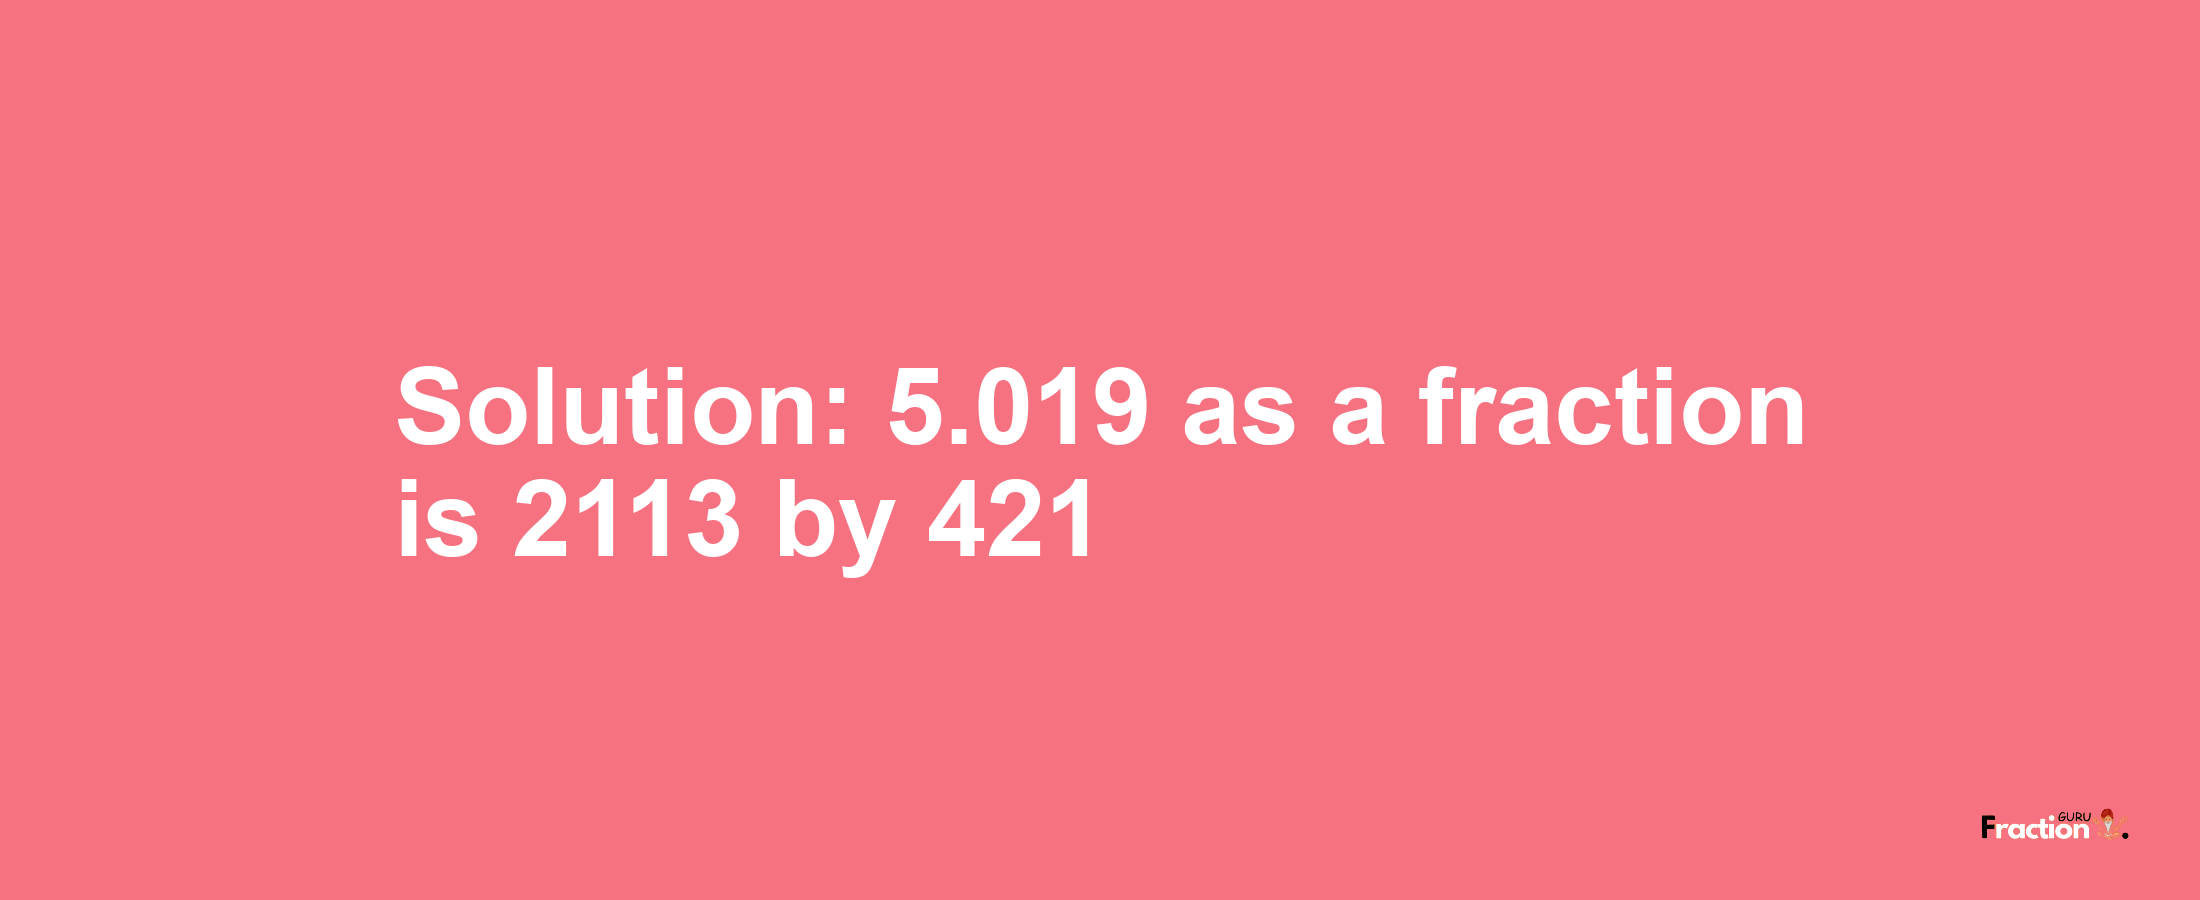 Solution:5.019 as a fraction is 2113/421